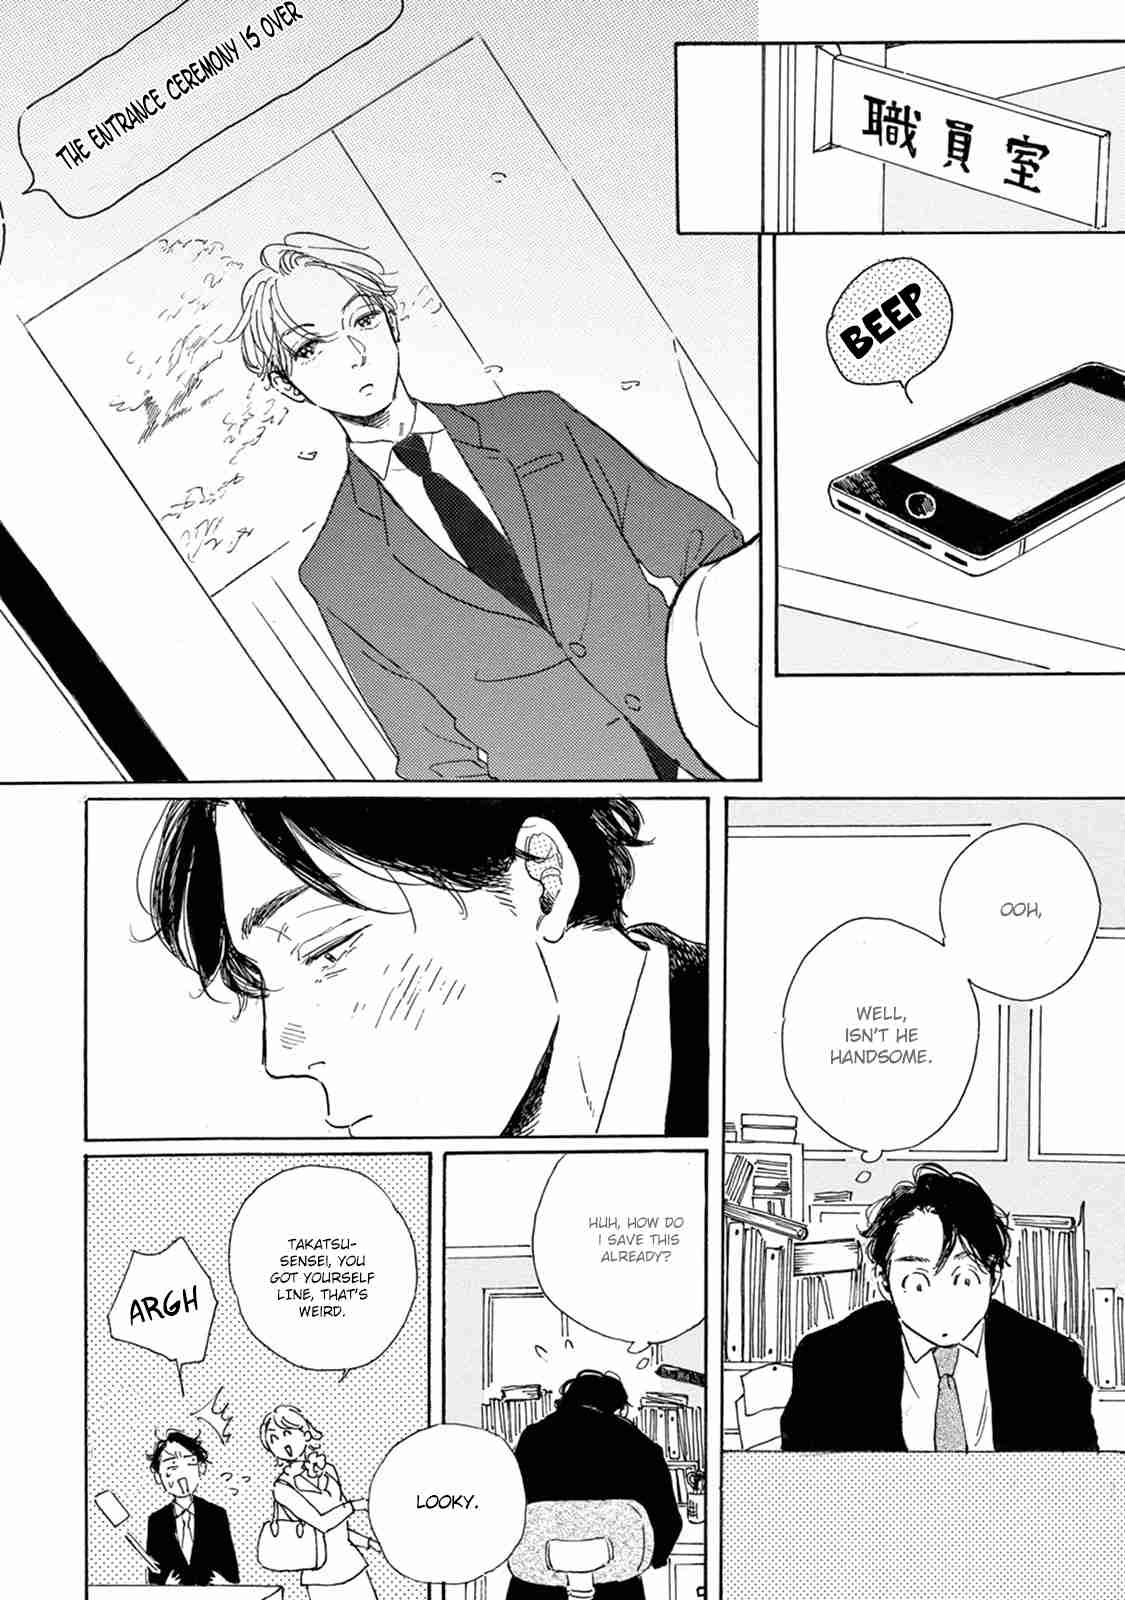 Young Bad Education Vol. 2 Ch. 5